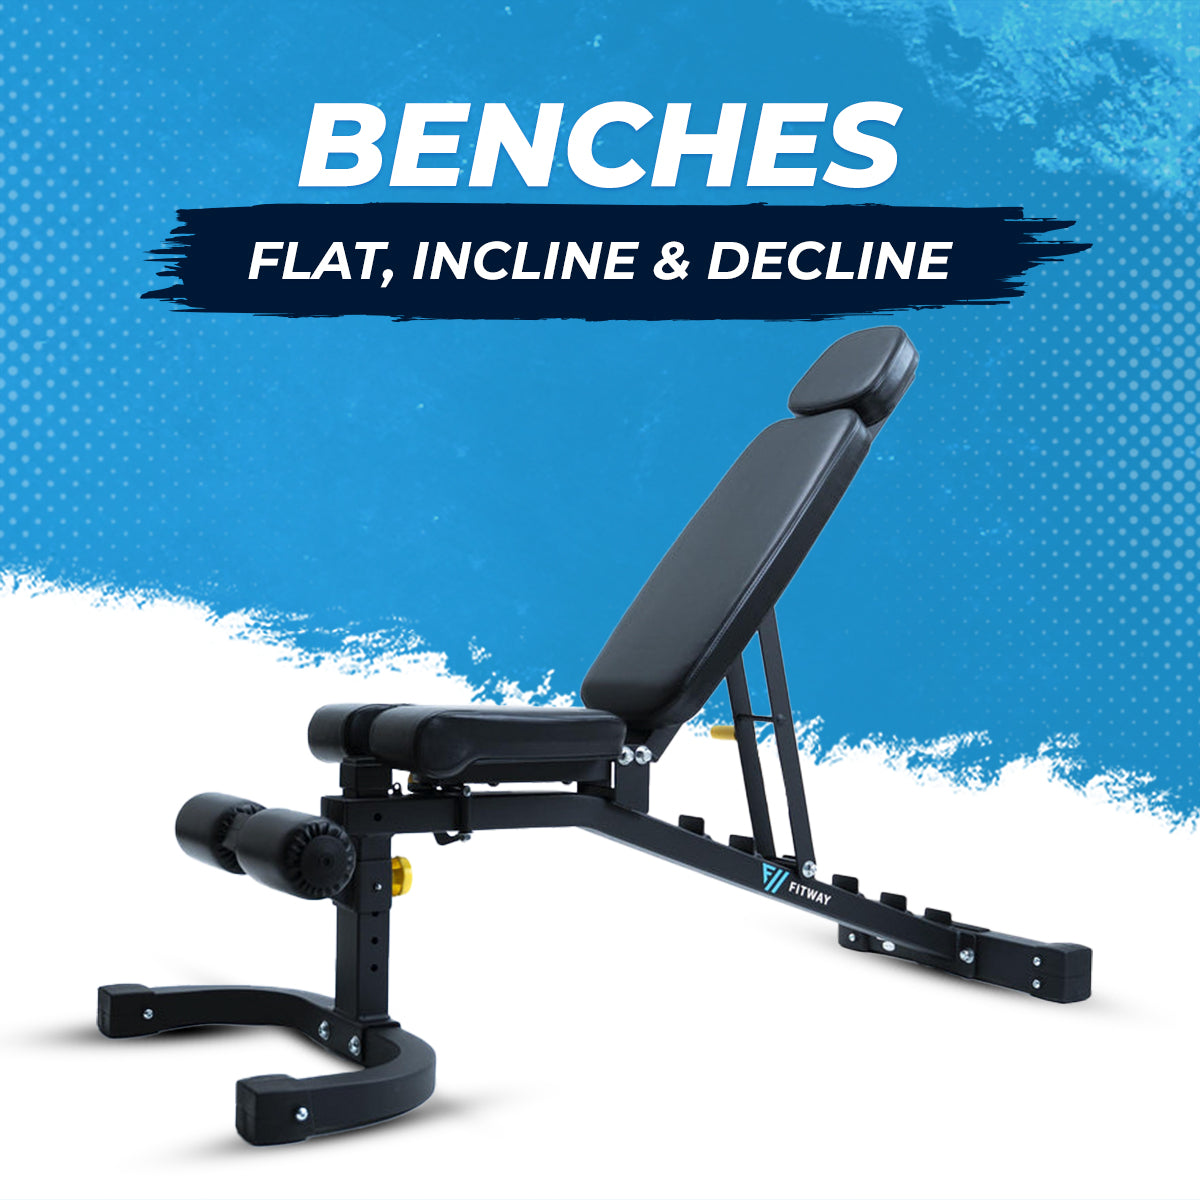 affordable, quality built exercise benches available in Canada | Fitness Experience